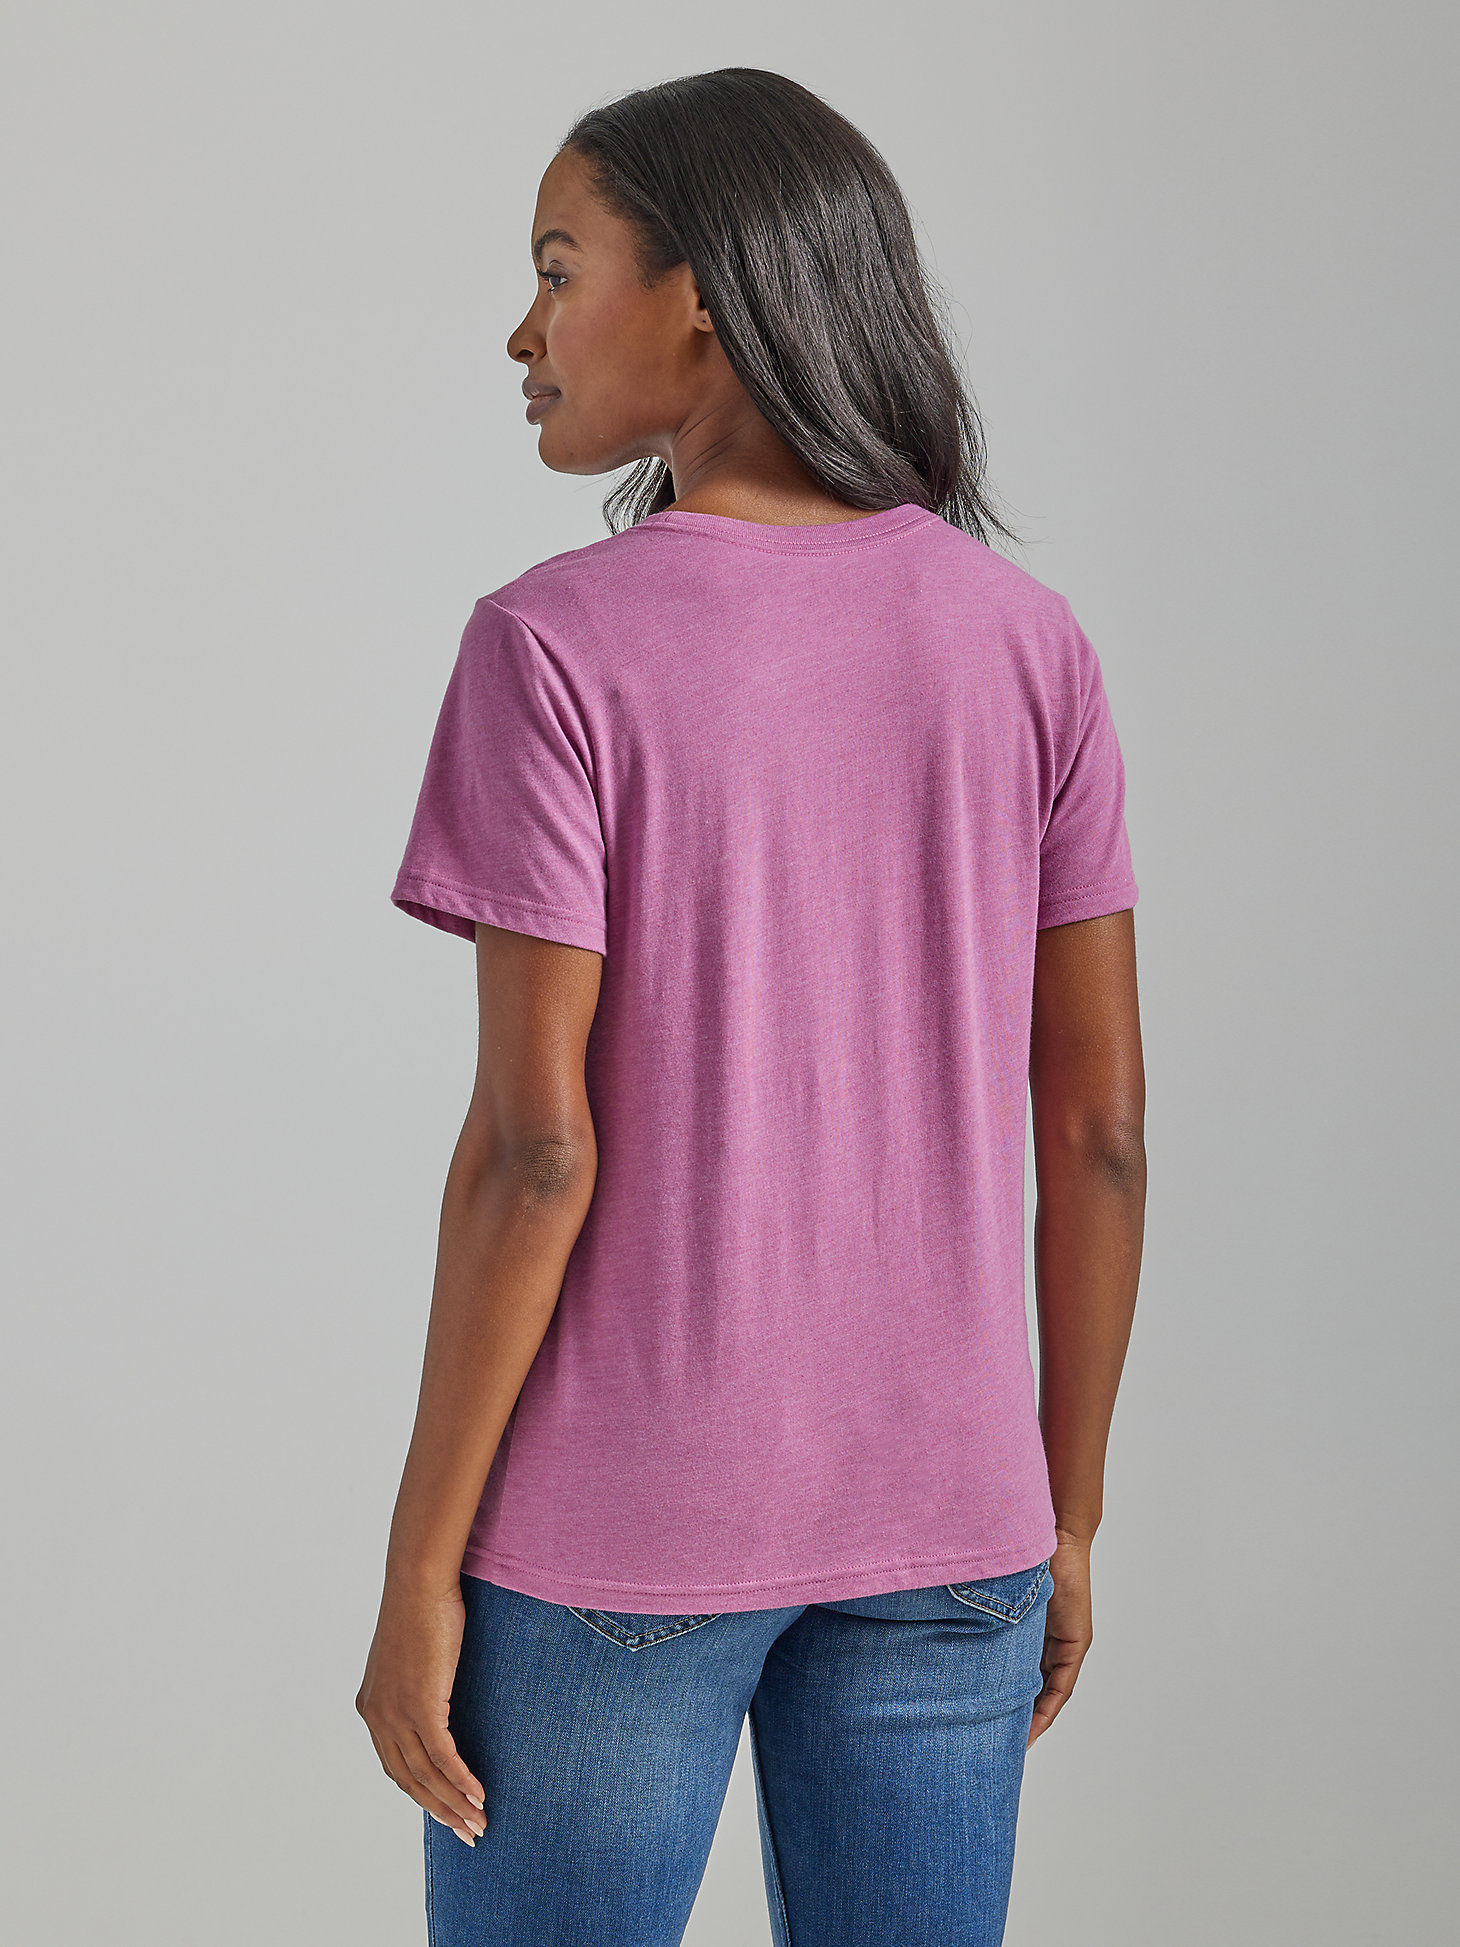 Women's Color Twitch Graphic Tee in Prunella Heather alternative view 1